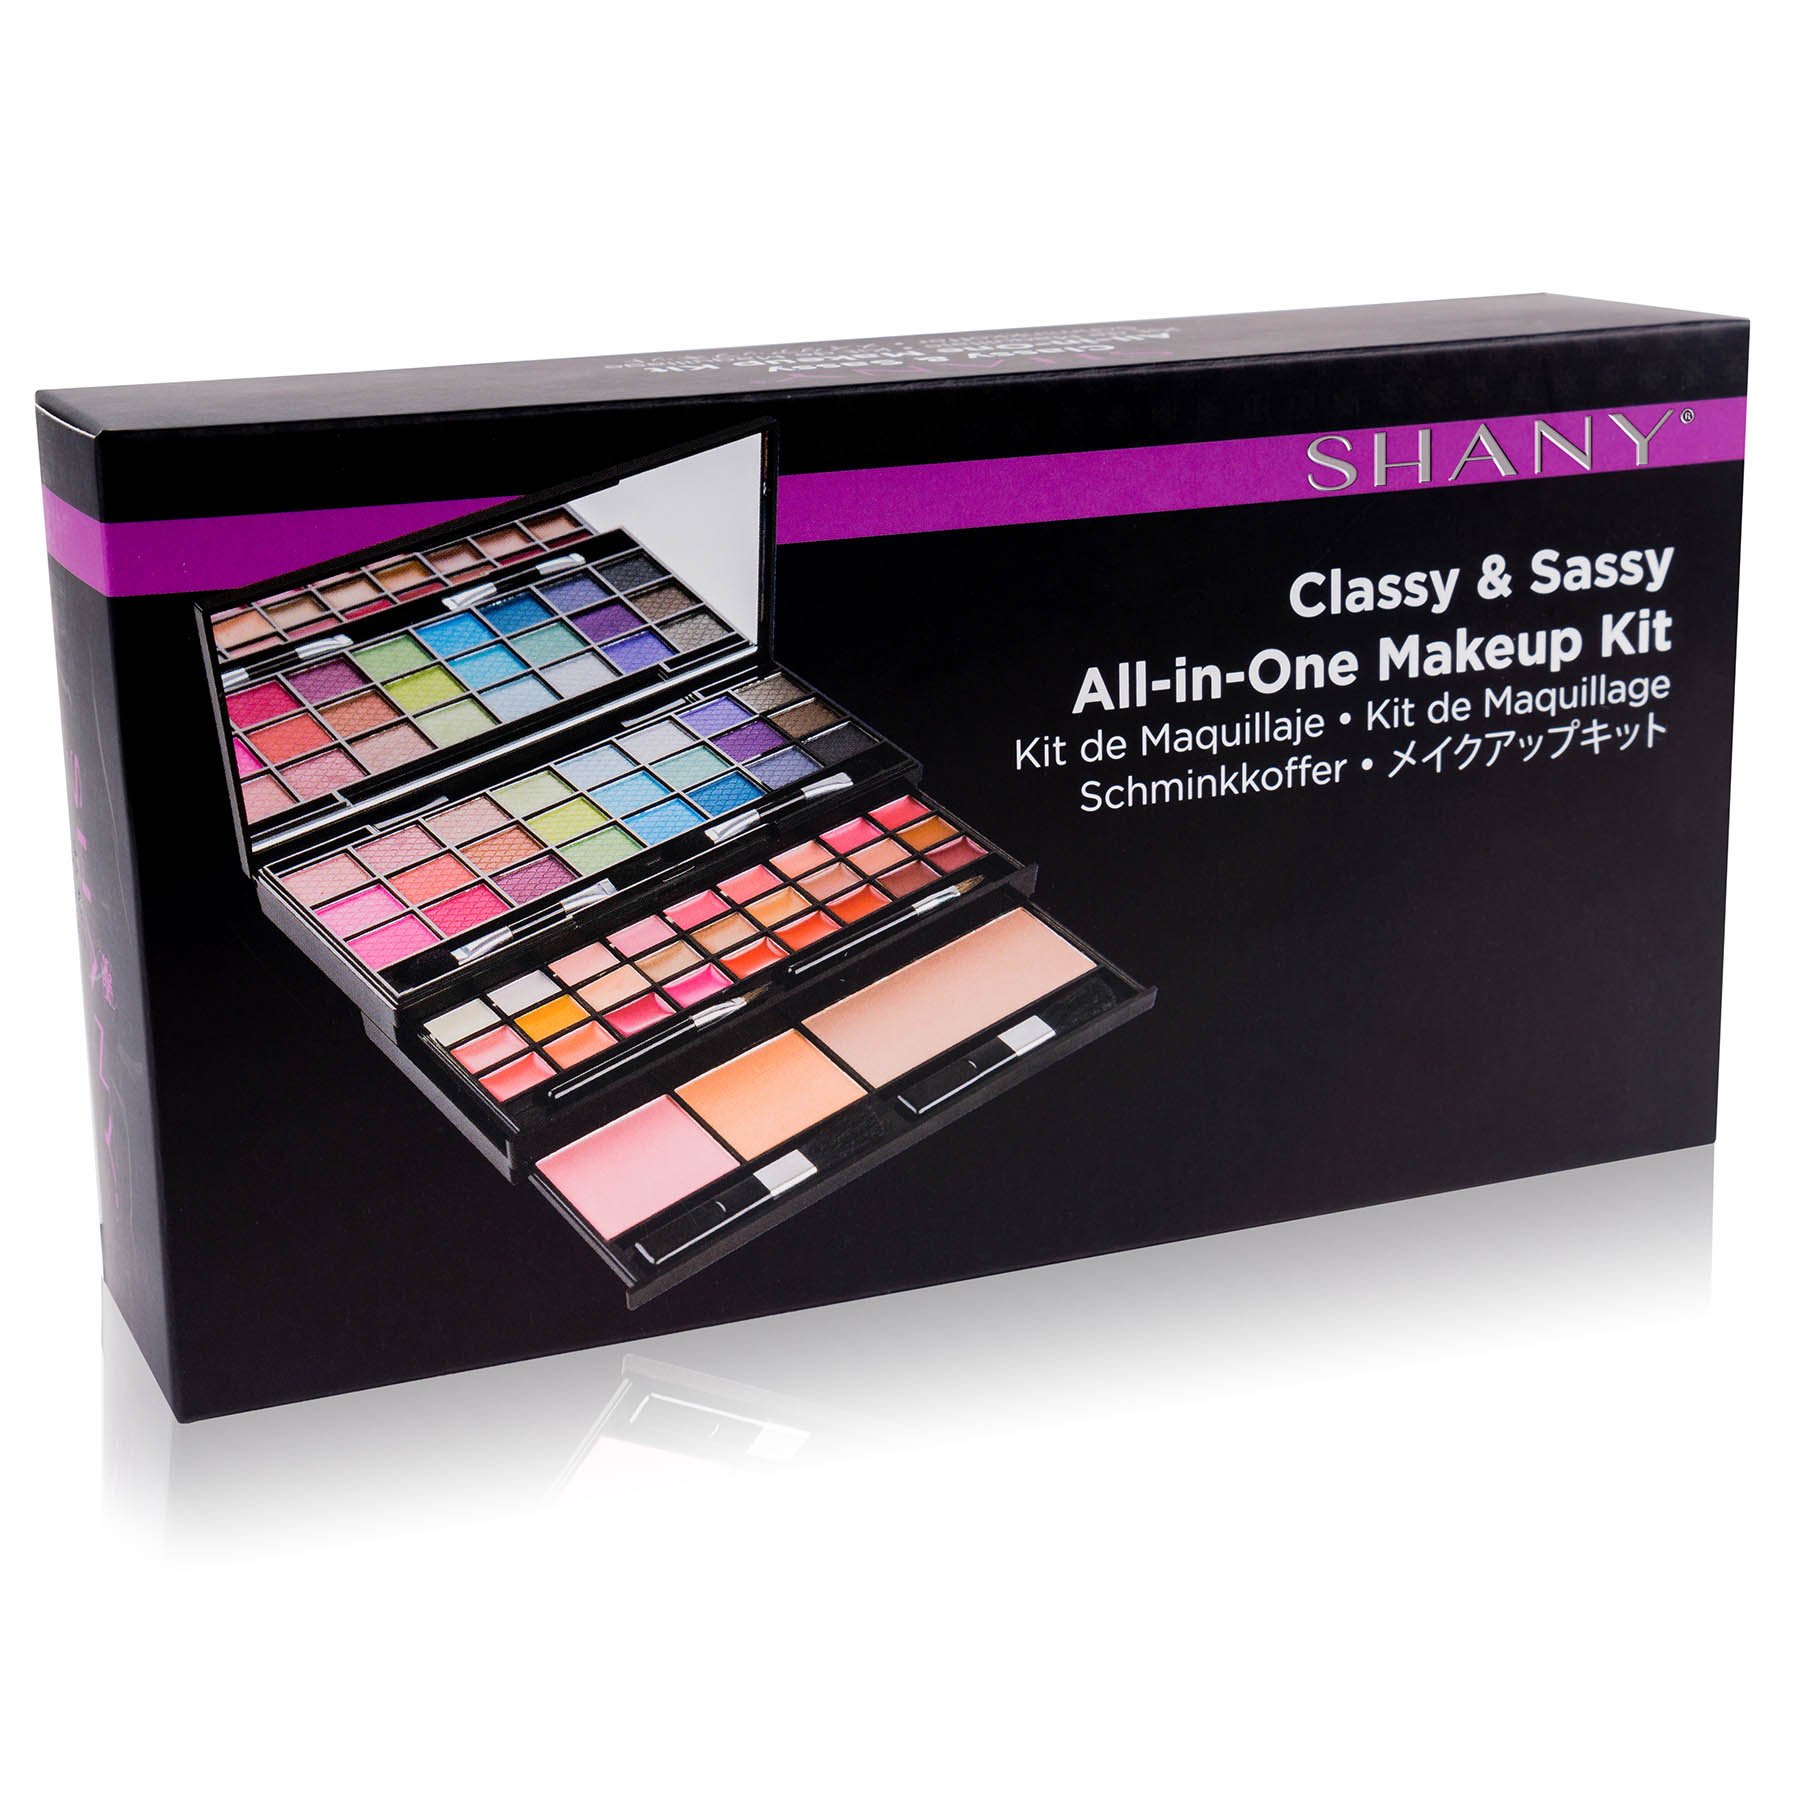 SHANY Classy & Sassy All-in-One Makeup Kit with Mirror, Applicators, 24 Eye Shadows, 18 Lip Glosses, 2 Blushes, and 1 Bronzer.